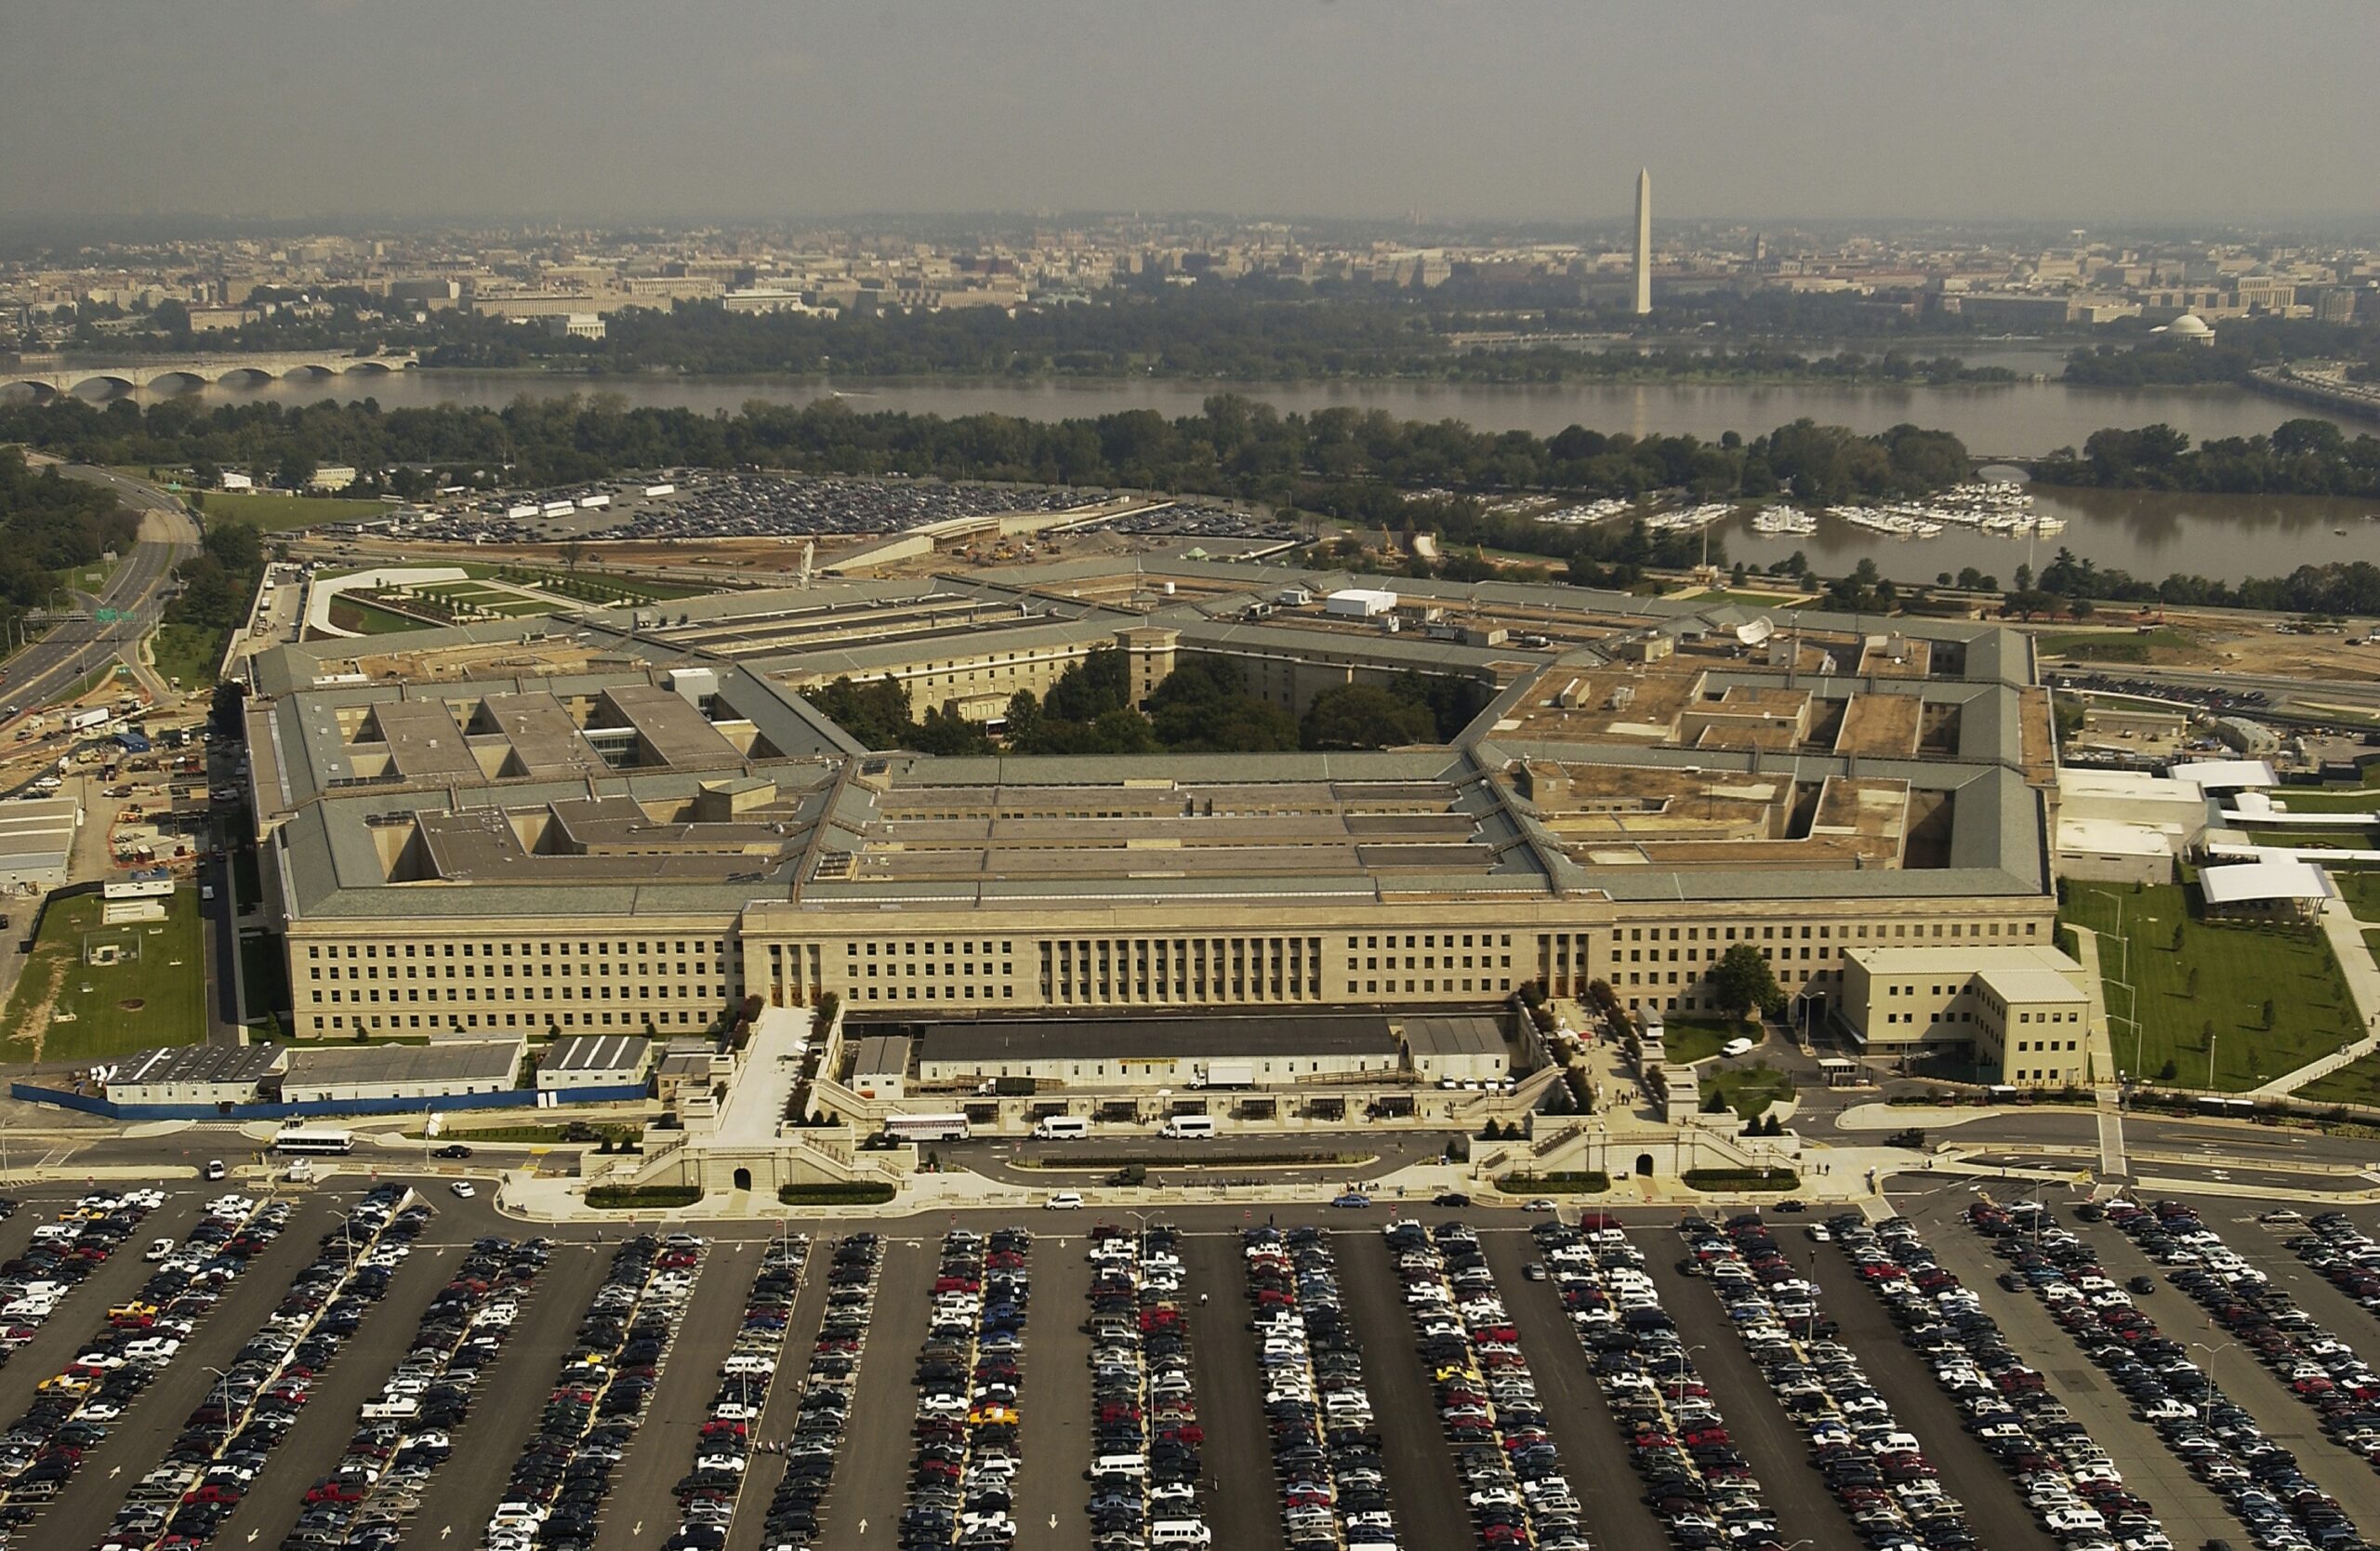 The Pentagon, headquarters of the Department of Defense